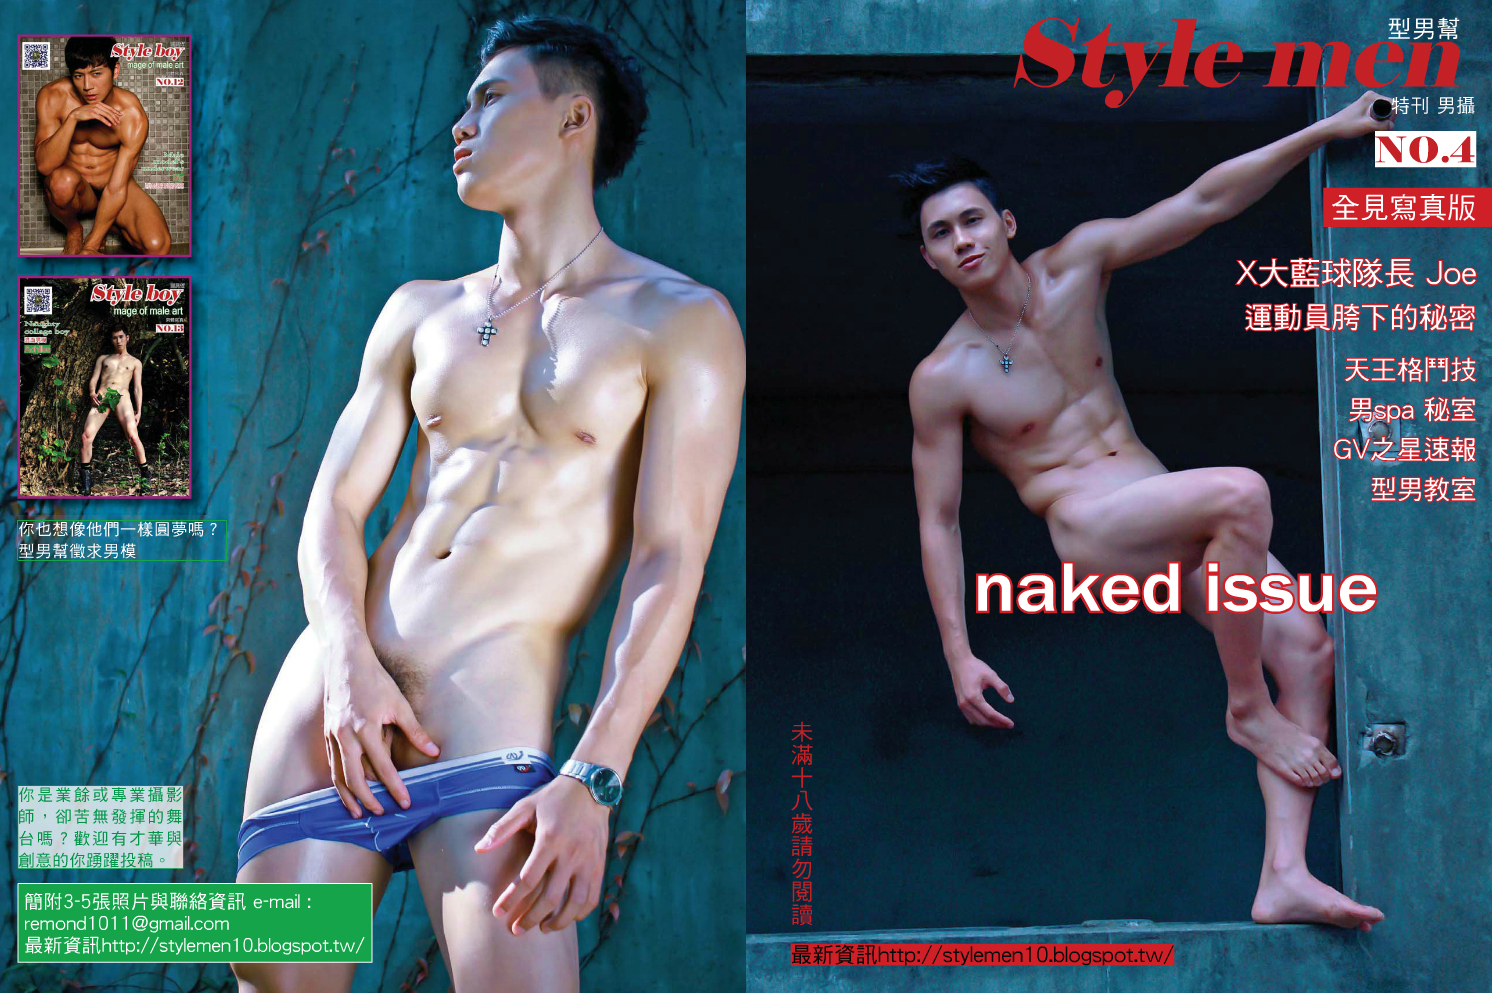 [PHOTO SET] STYLE MEN 04 – NAKED ISSUE  – CROSSOVER 18cm